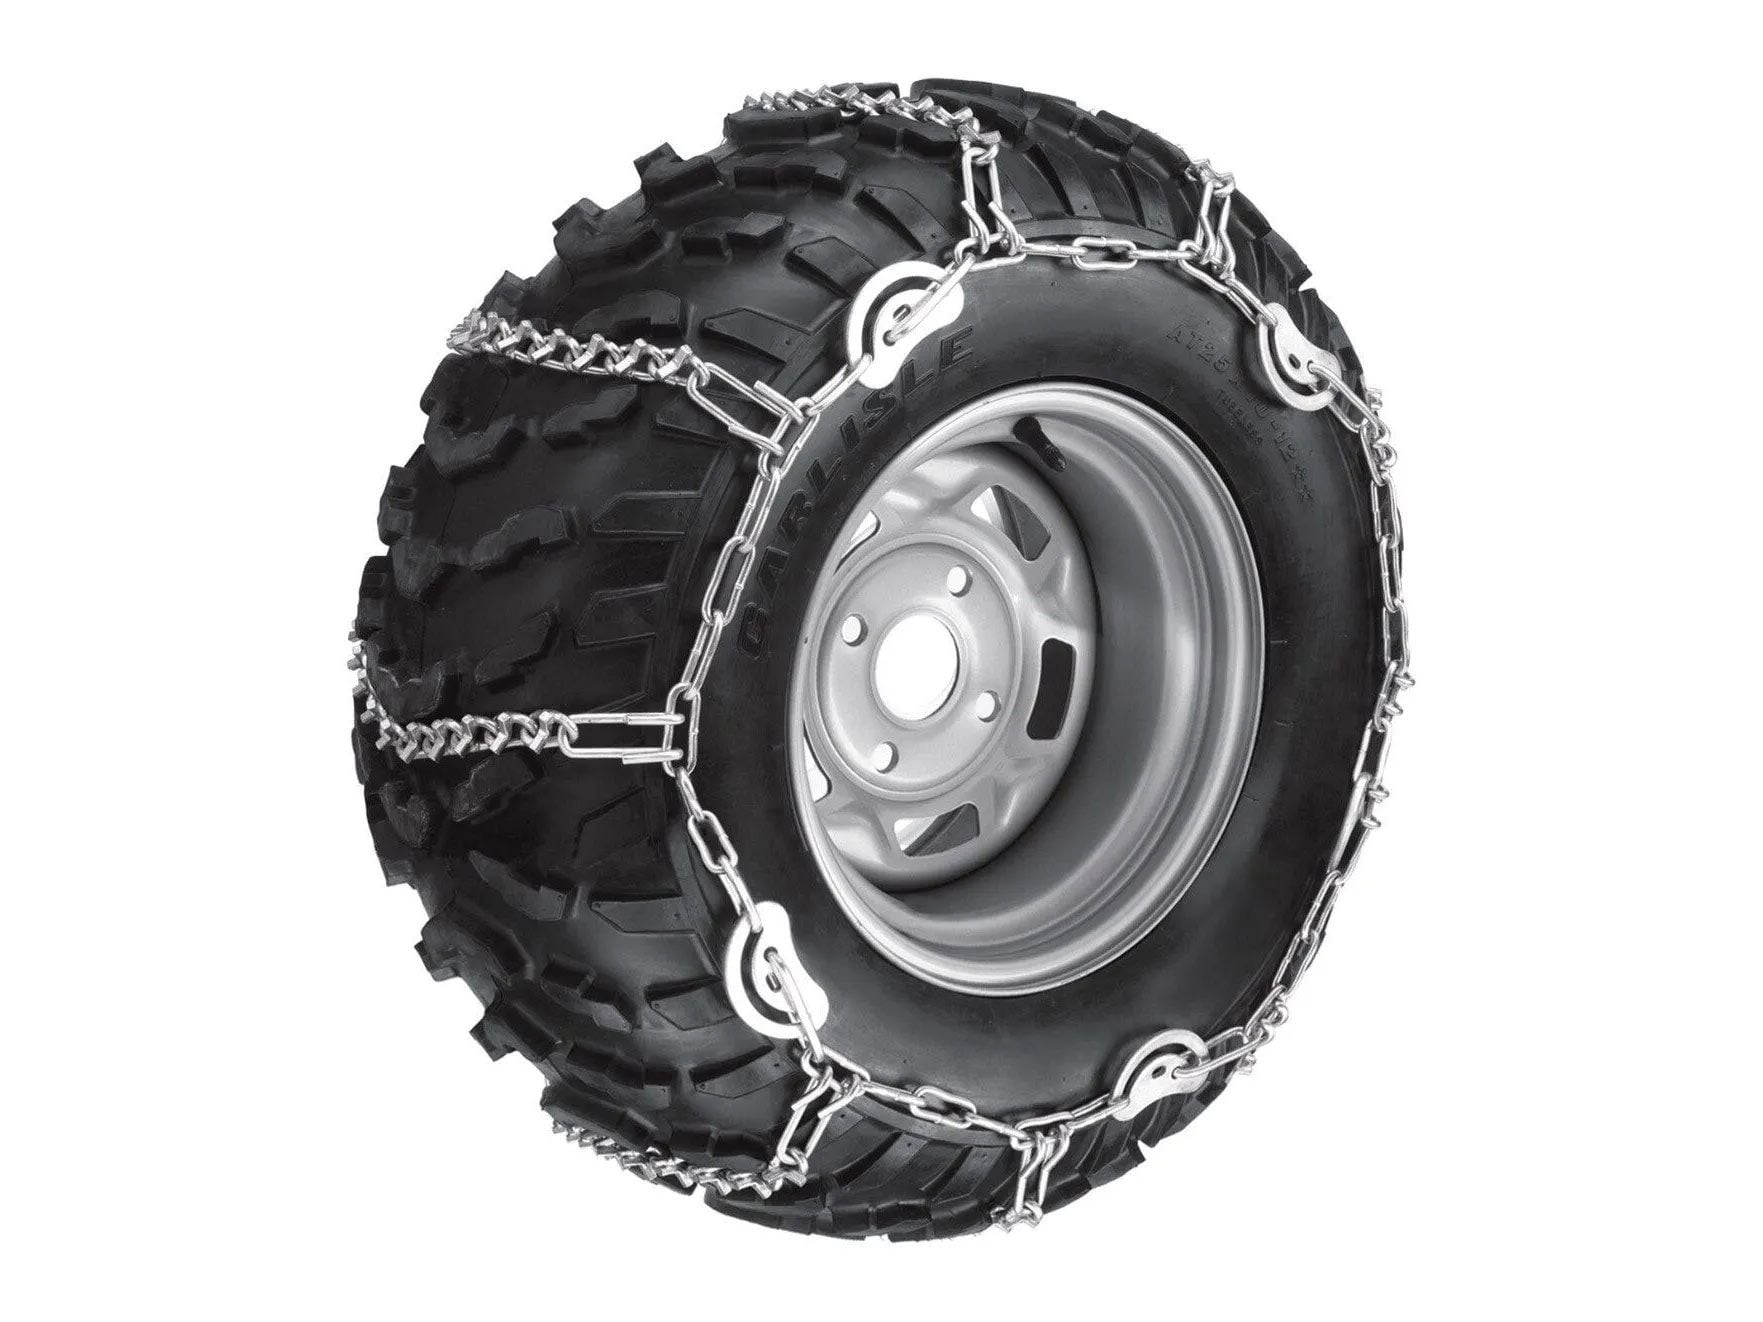 Be prepared for winter riding. Can-Am has a couple of different sizes of rear tire chains to help.